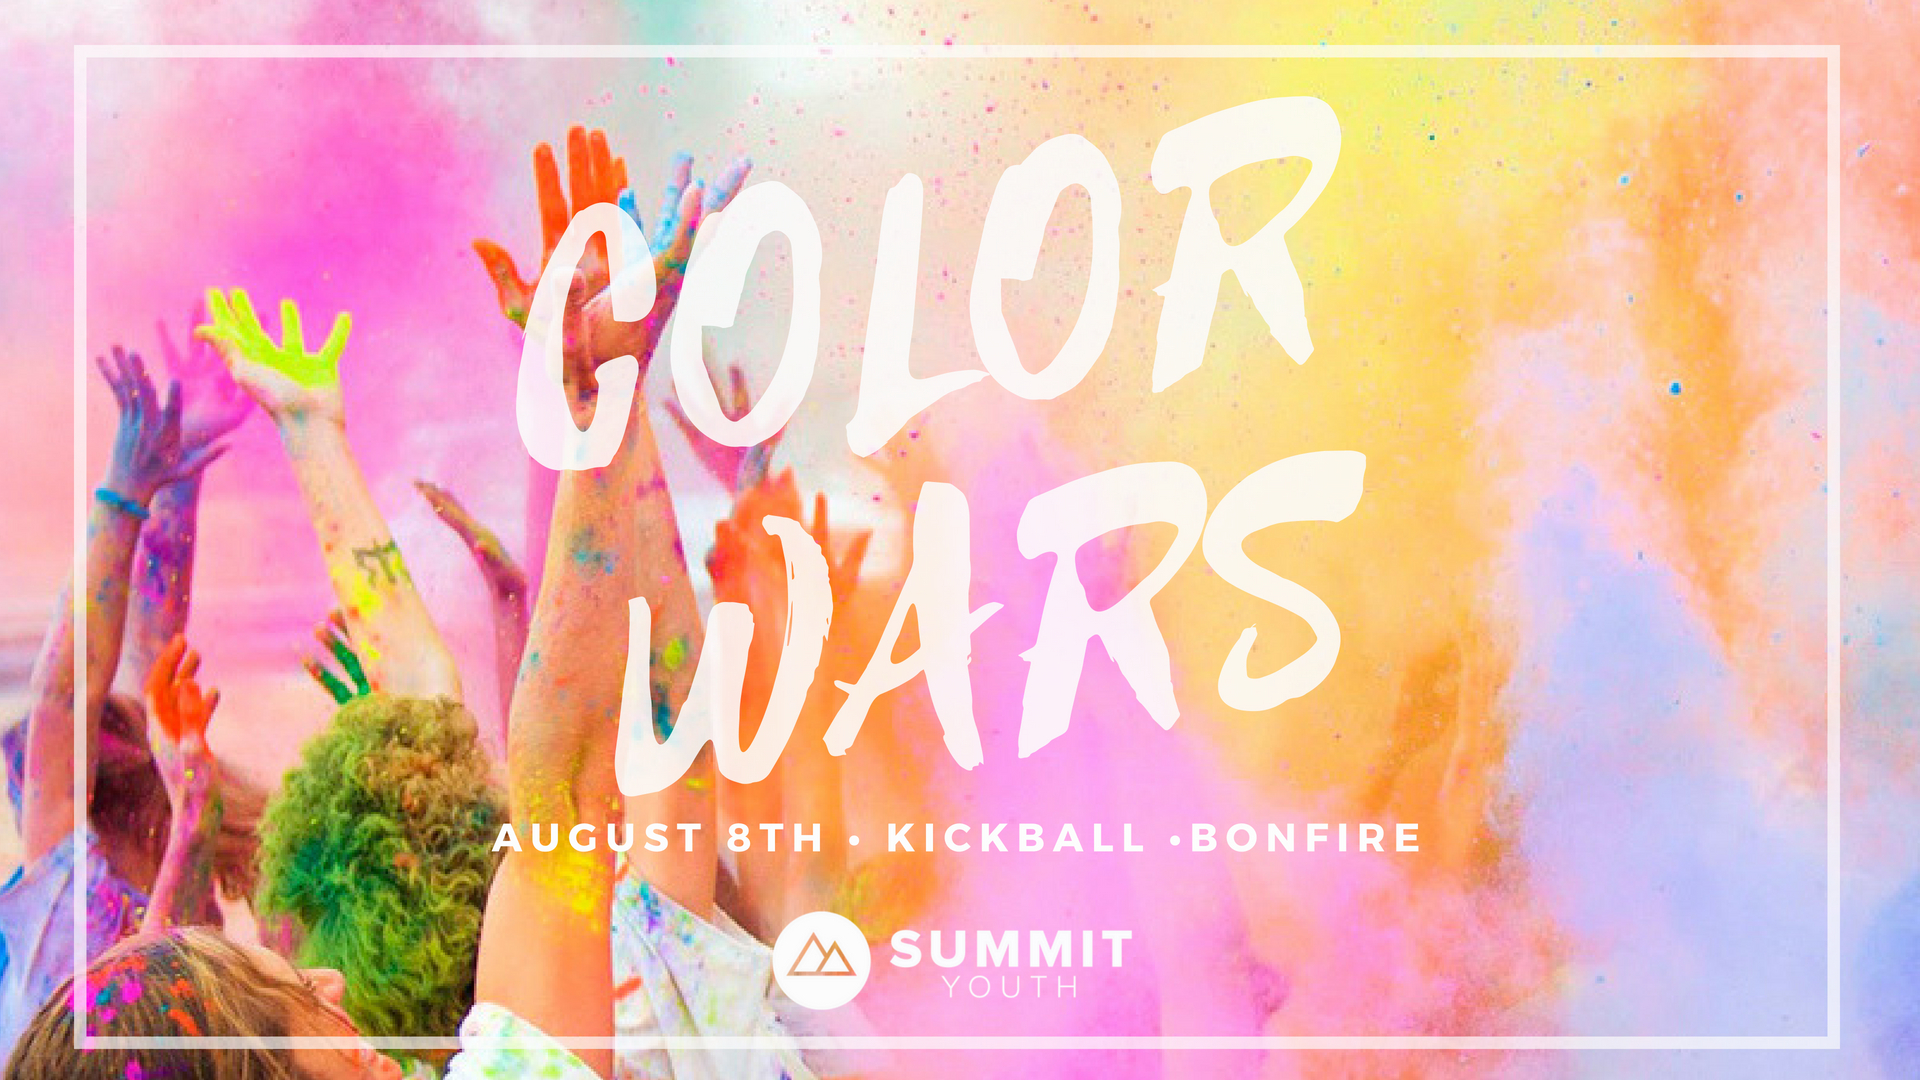 Youth Color Wars – Summit Church